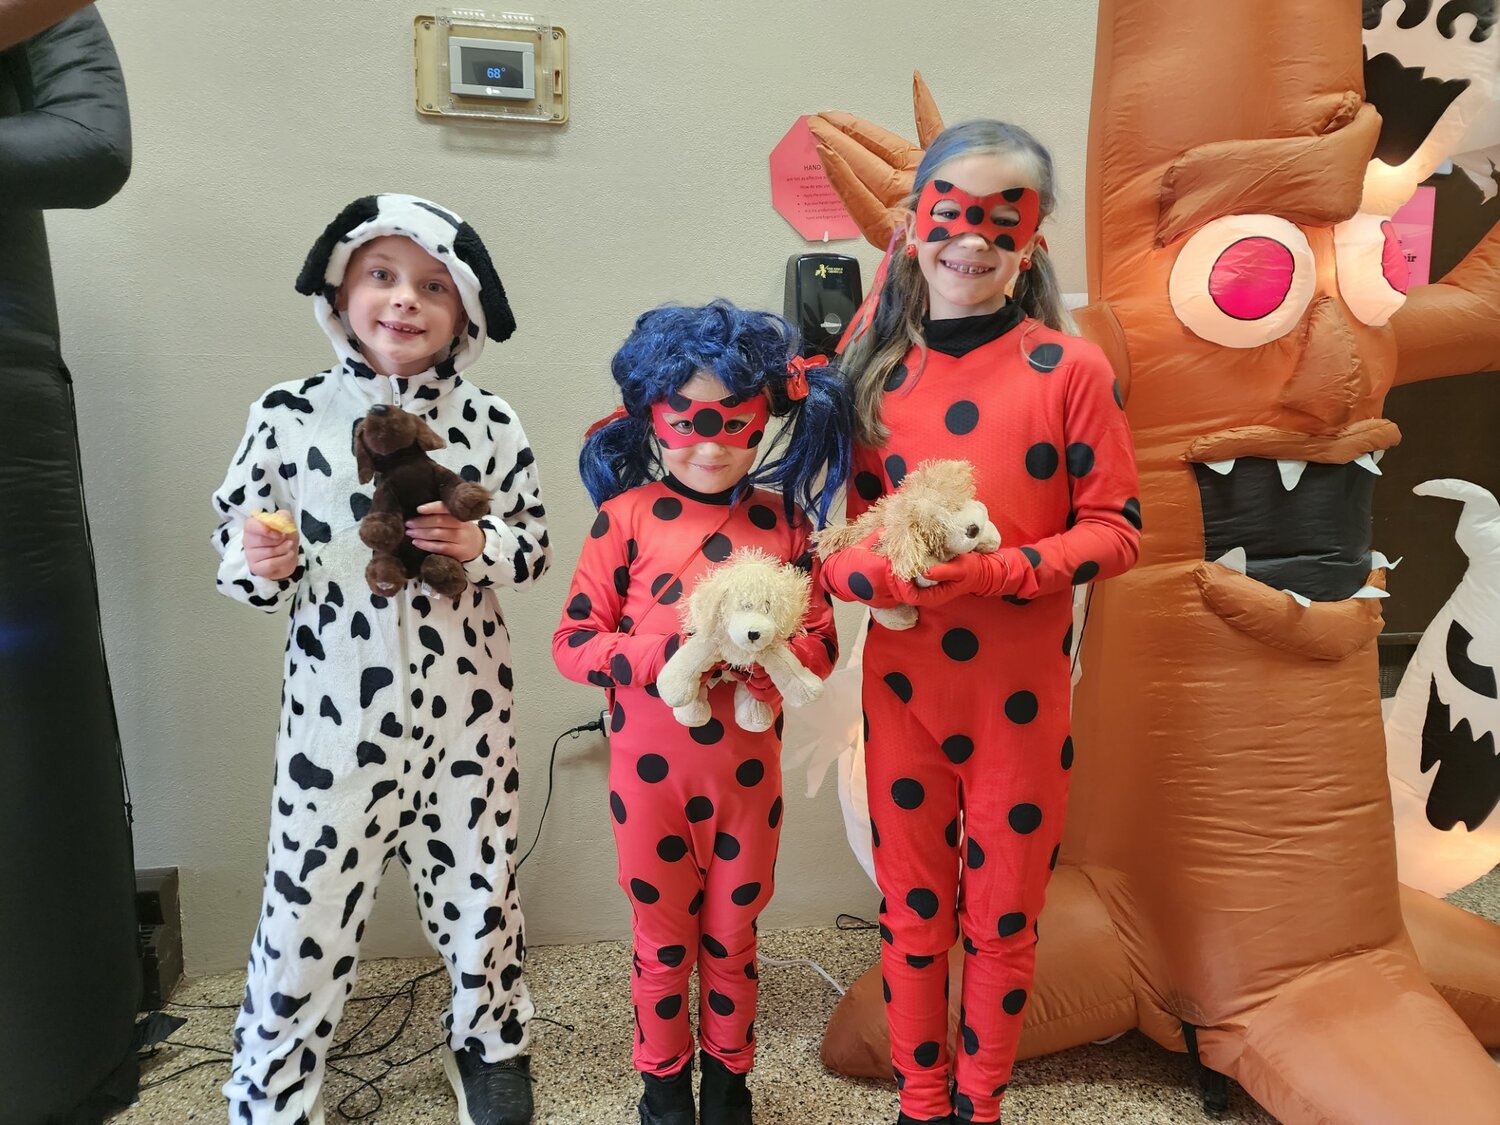 Clint Thom made an excellent dog, while Clare Thom and Ashlyn Kaltenbrun channeled the Miraculous Ladybug at Ellsworth’s Pumpkin in the Park Saturday, Oct. 28.